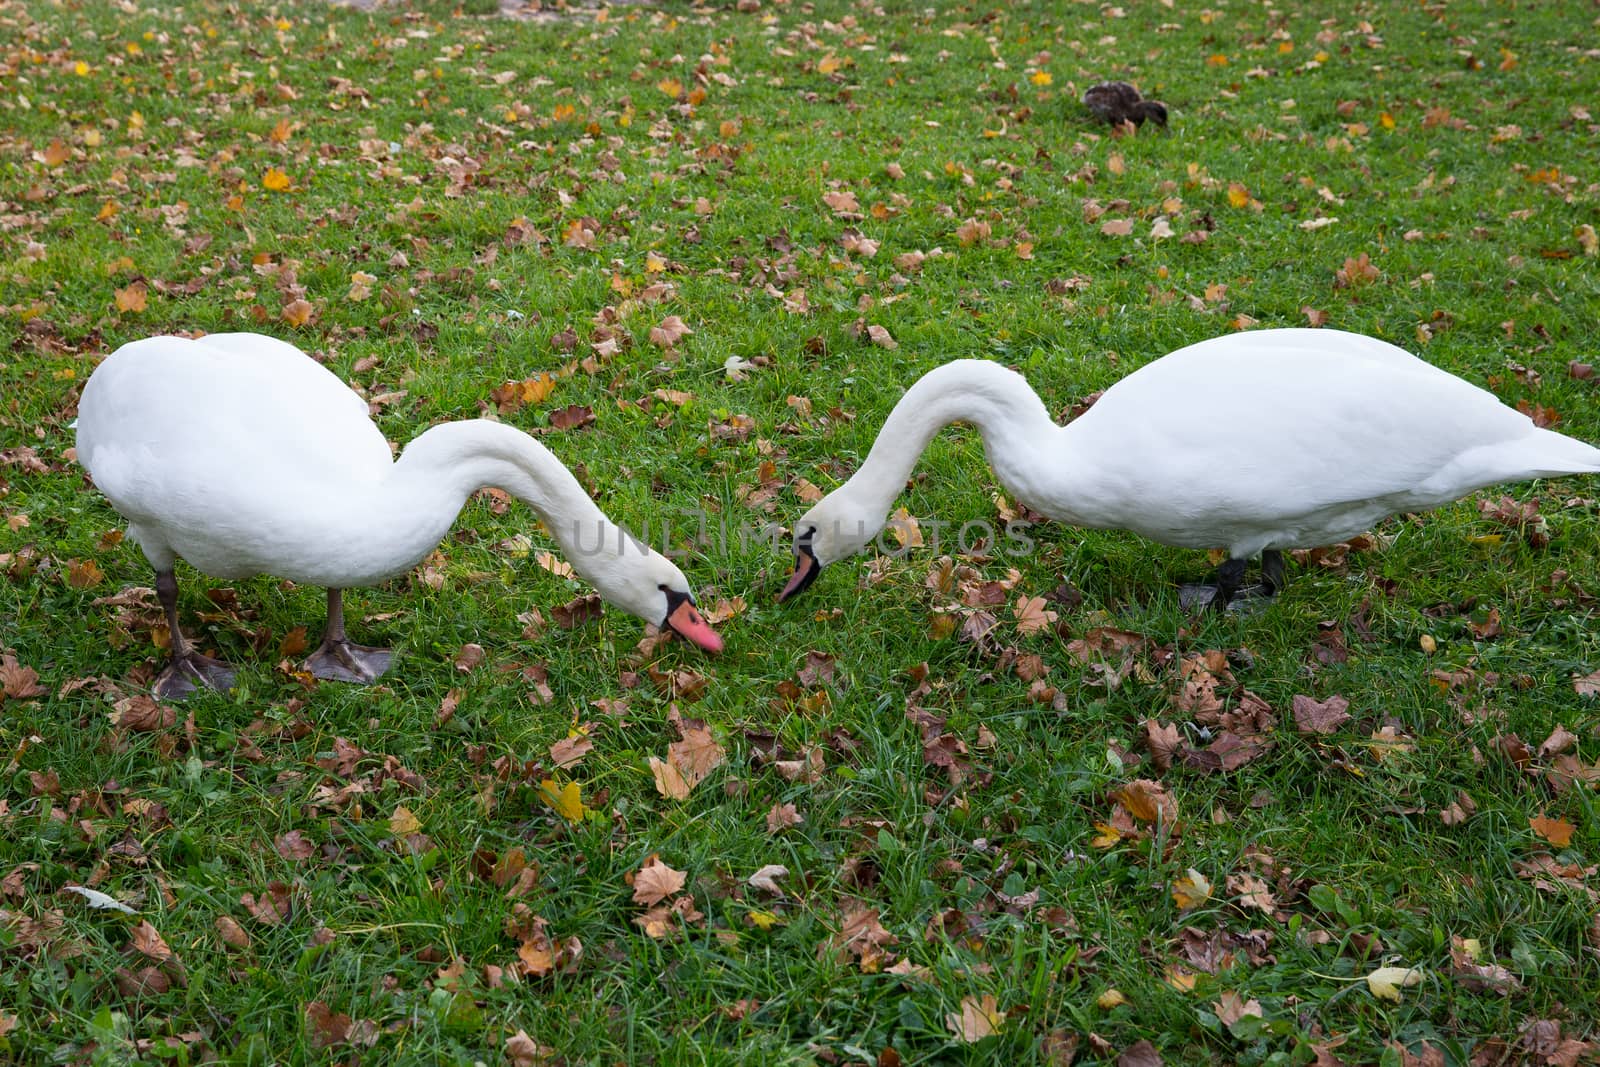 A pair of swans nibbling grass. Swans walking on the grass. Swans eat. White swans on the lawn. by AndrewBu